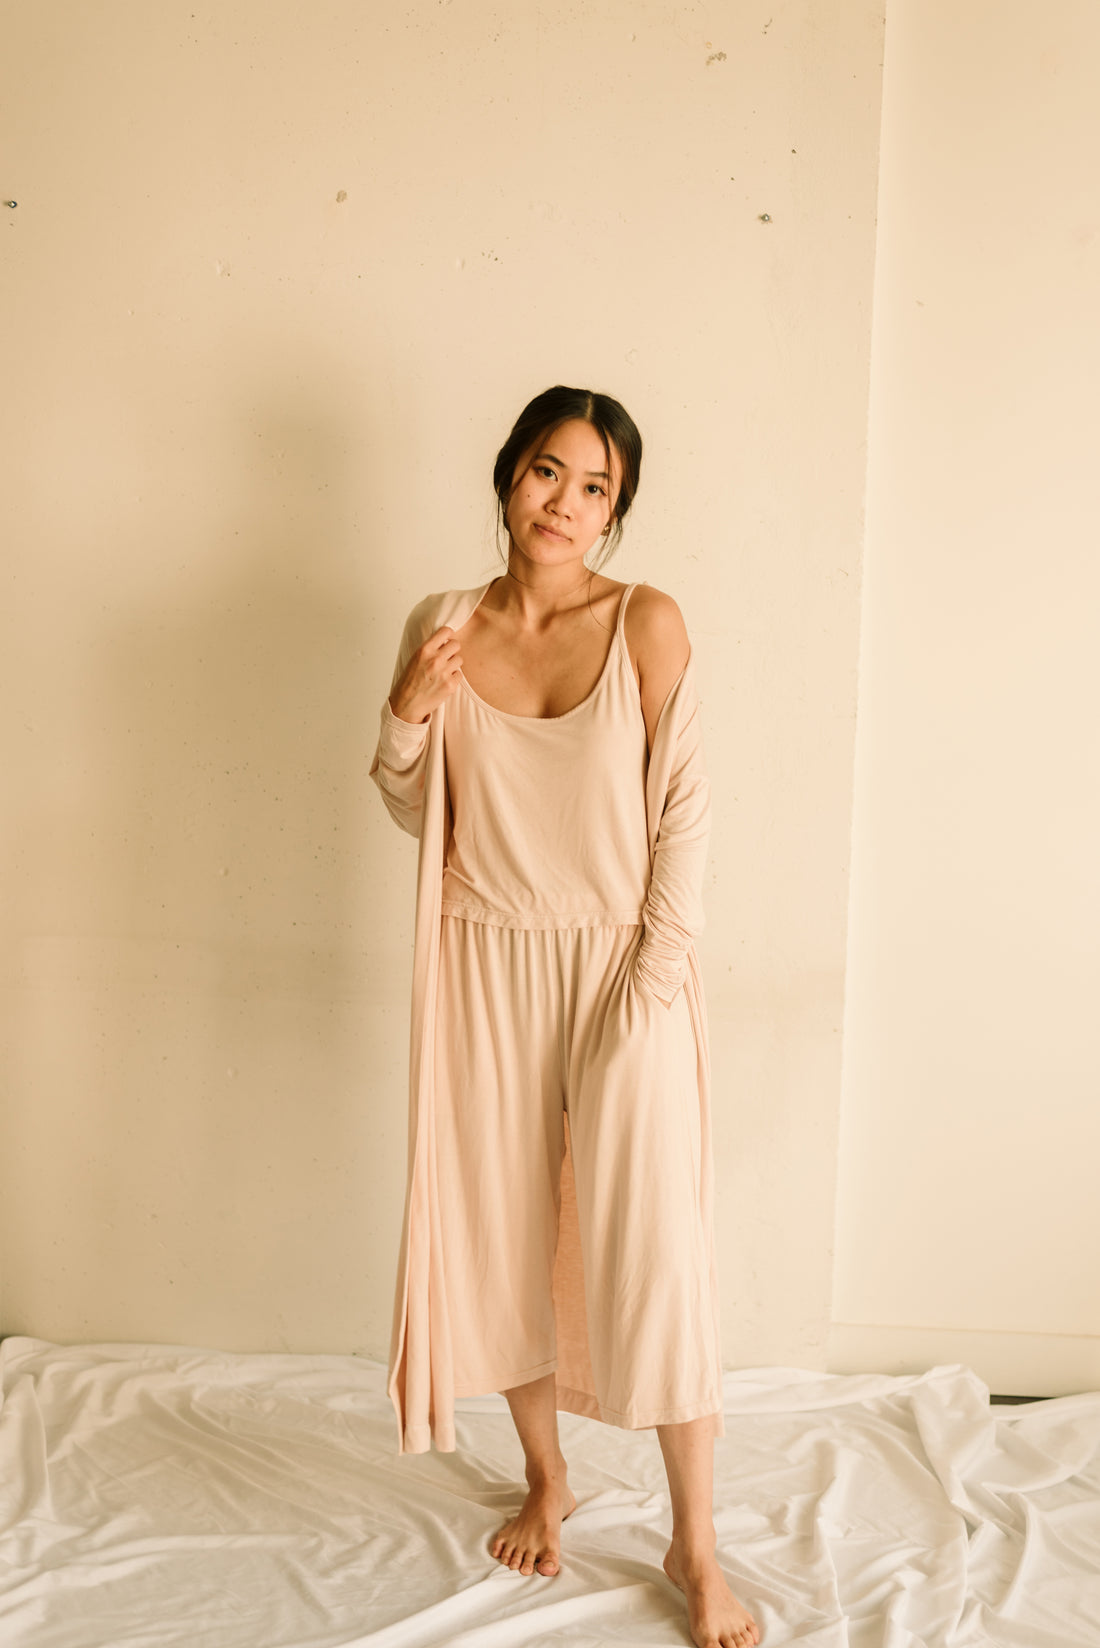 The Relaxed Bamboo Crop Pant